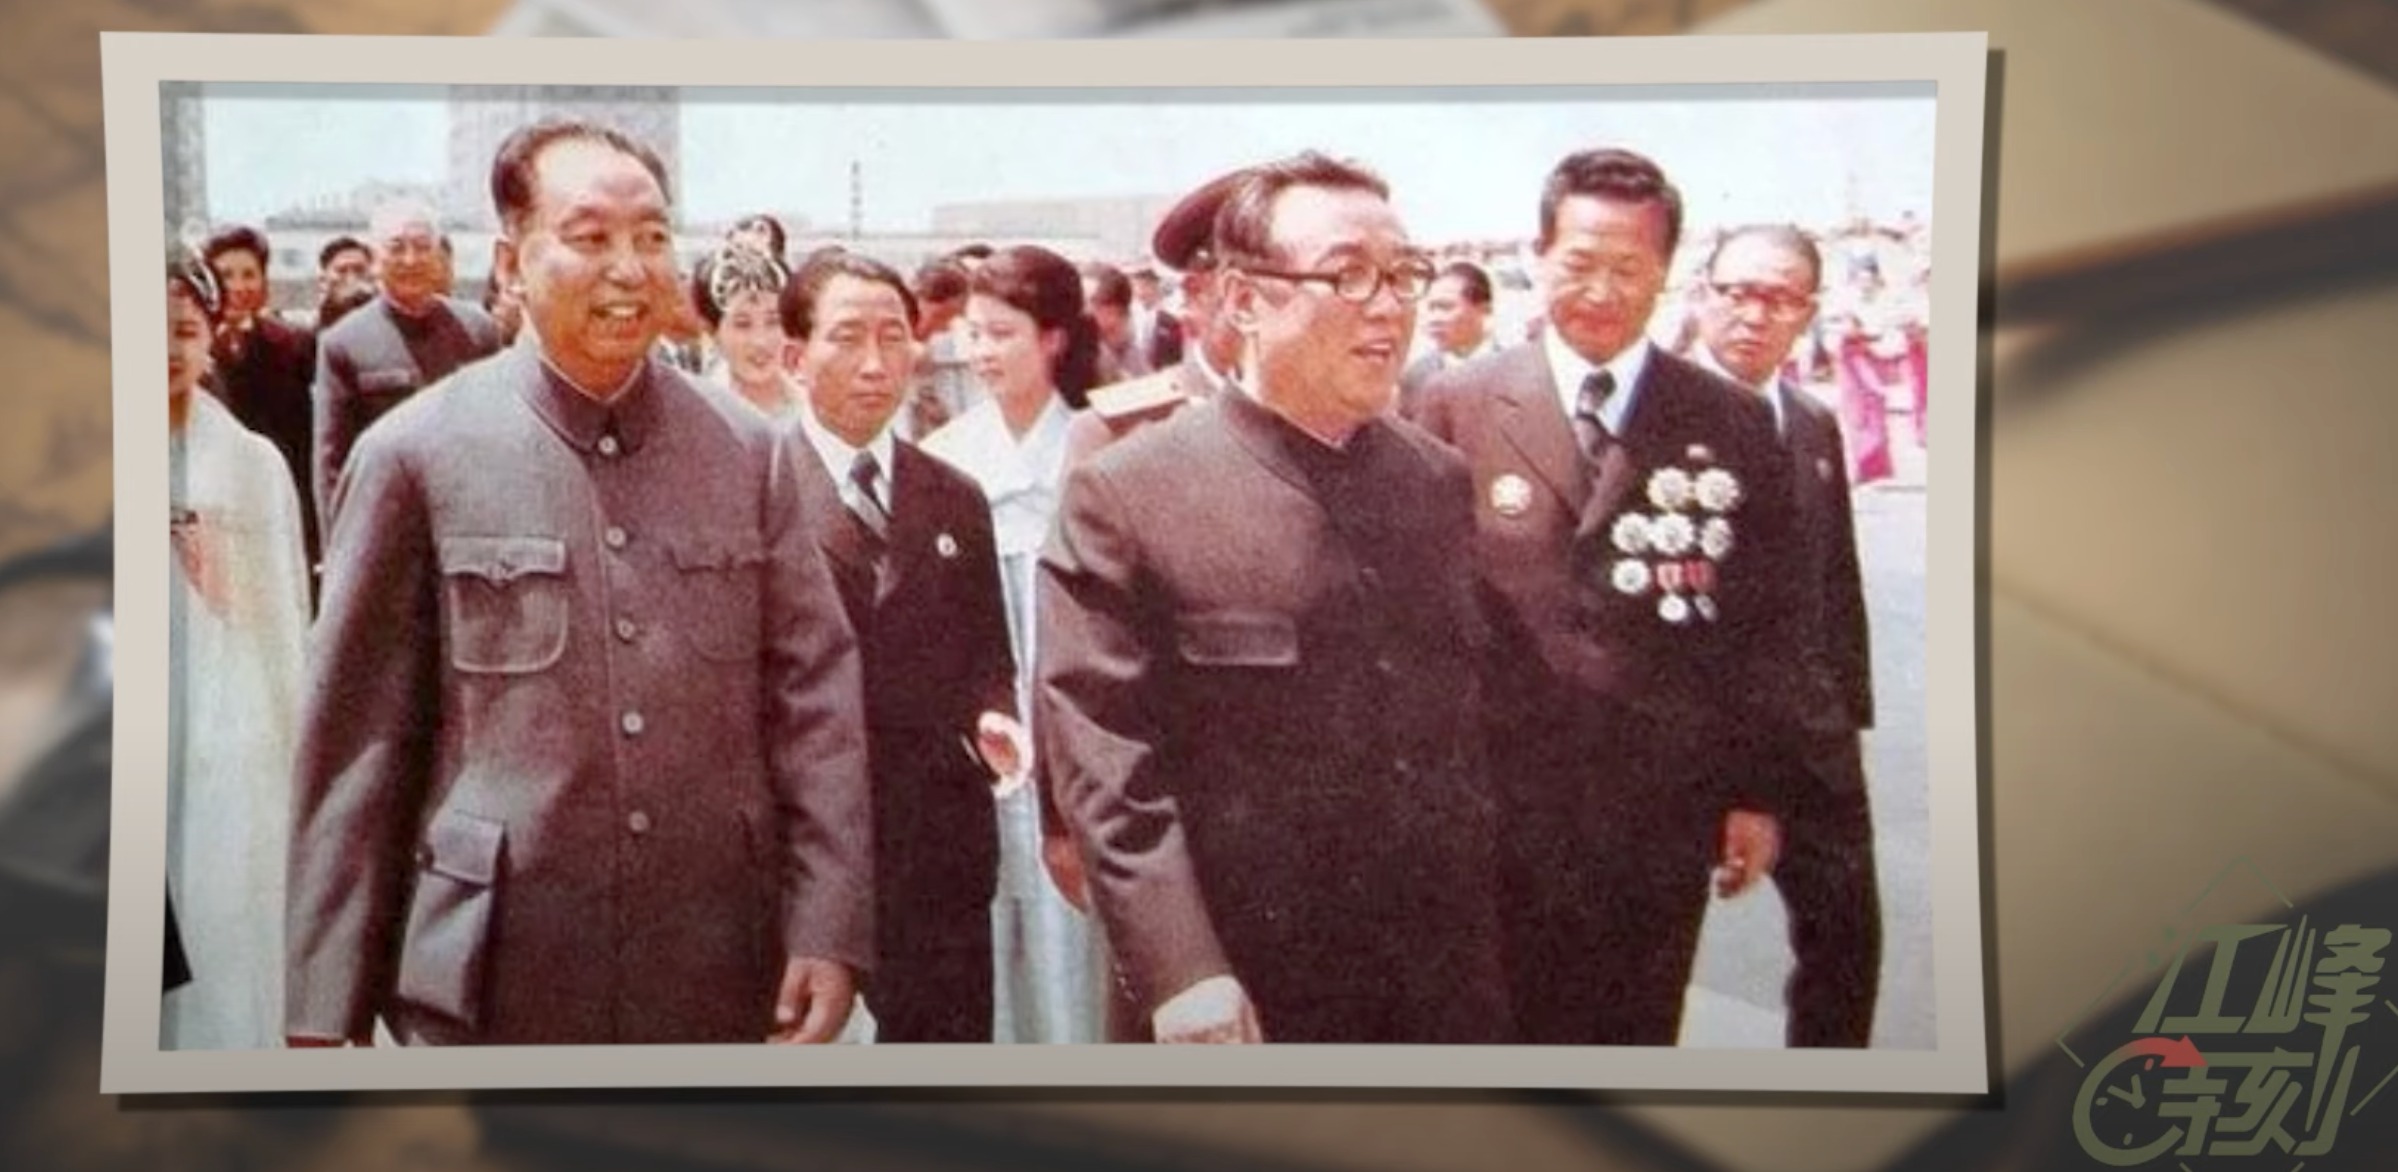 Hua Guofeng's visit to the DPRK